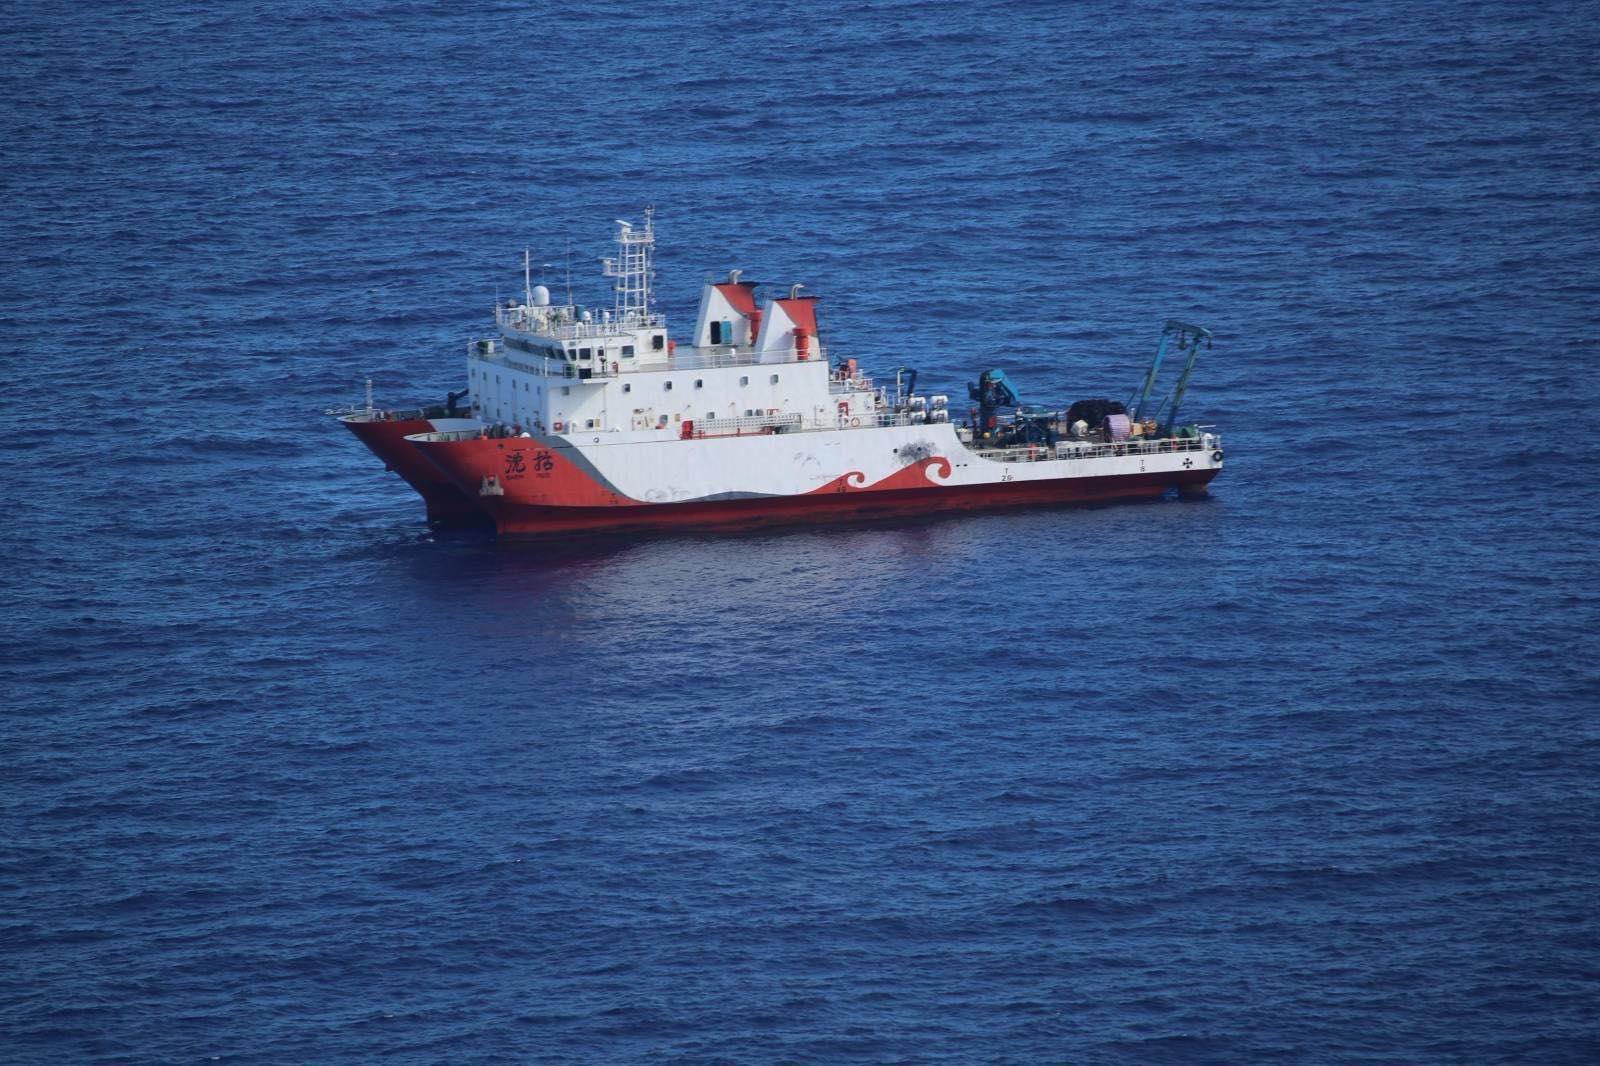 Noting that their presence in the area is "very unusual," an Armed Forces of the Philippines (AFP) official on Monday said the Chinese vessel first spotted off Catanduanes may be conducting a marine survey in the eastern section of the country.